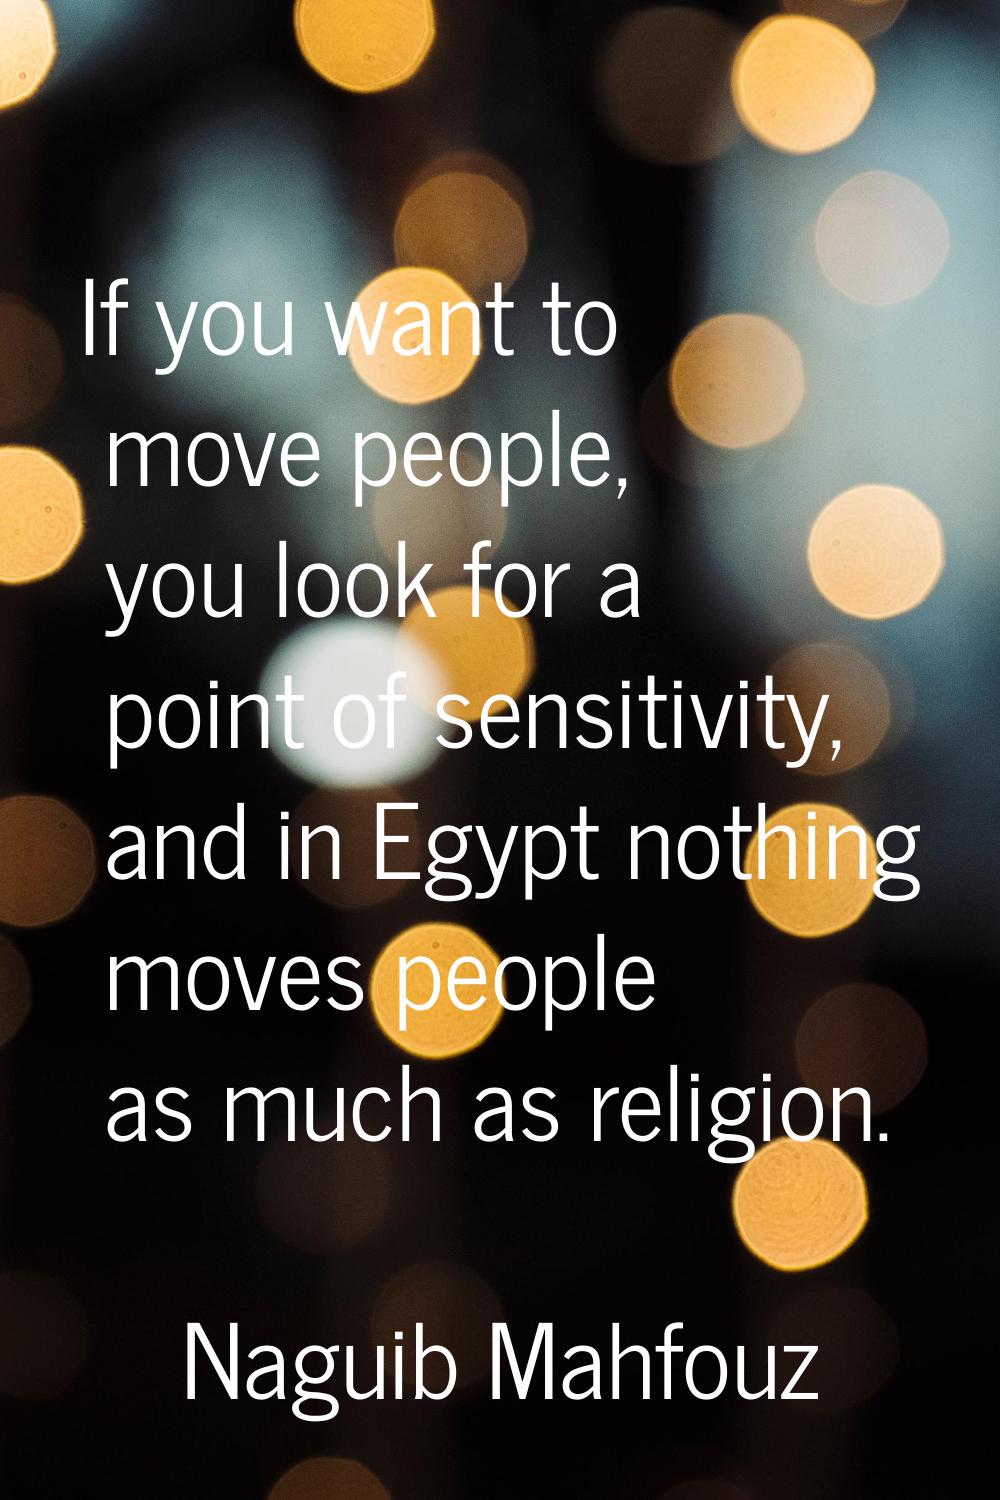 If you want to move people, you look for a point of sensitivity, and in Egypt nothing moves people 